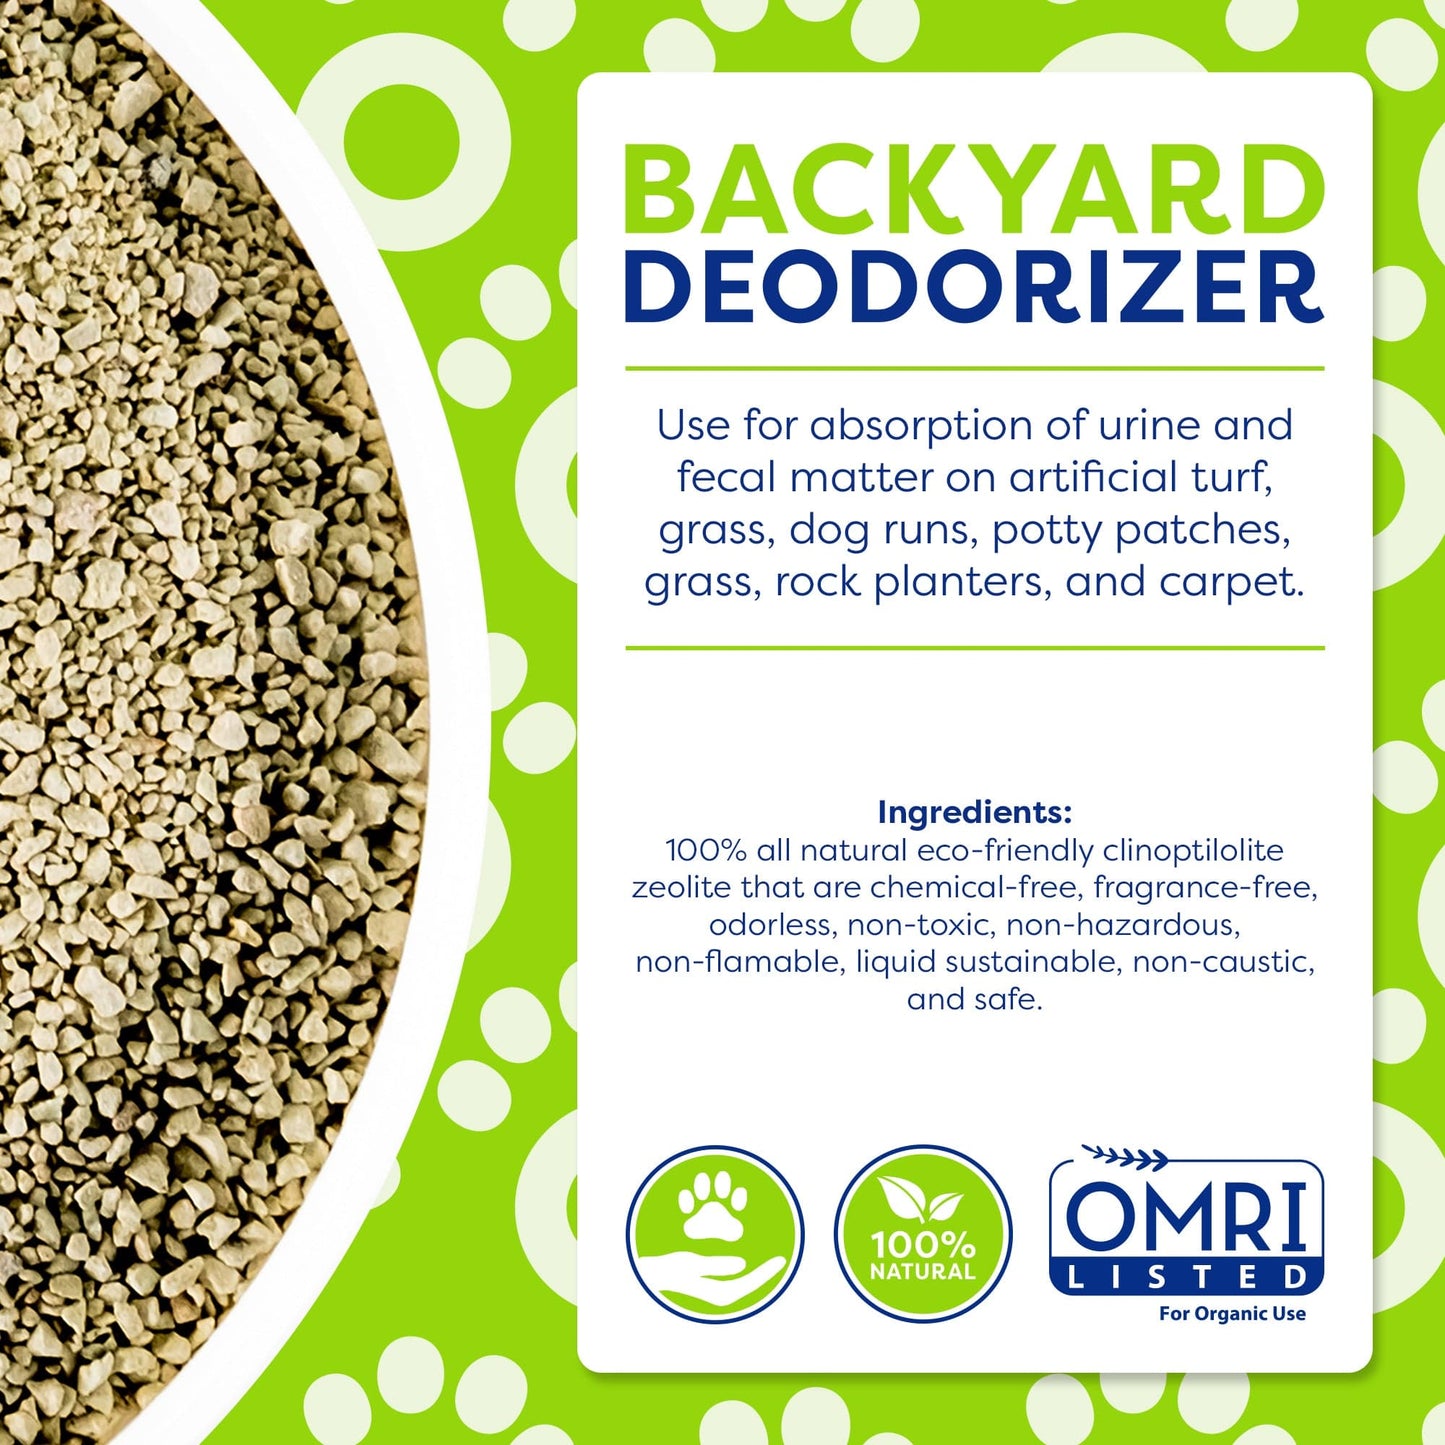 INFOGRAPHIC BACKYARD DEODORIZER: Use for absorption of urine and fecal matter on artificial turf, grass, dog runs, potty patches, rock planters, and carpet. INGREDIENTS: 100% all natural eco-friendly clinoptilolite zeolite that are chemical-free, odorless, non-toxic, non-hazardous, non-flammable, liquid sustainable, non-caustic, and safe. 